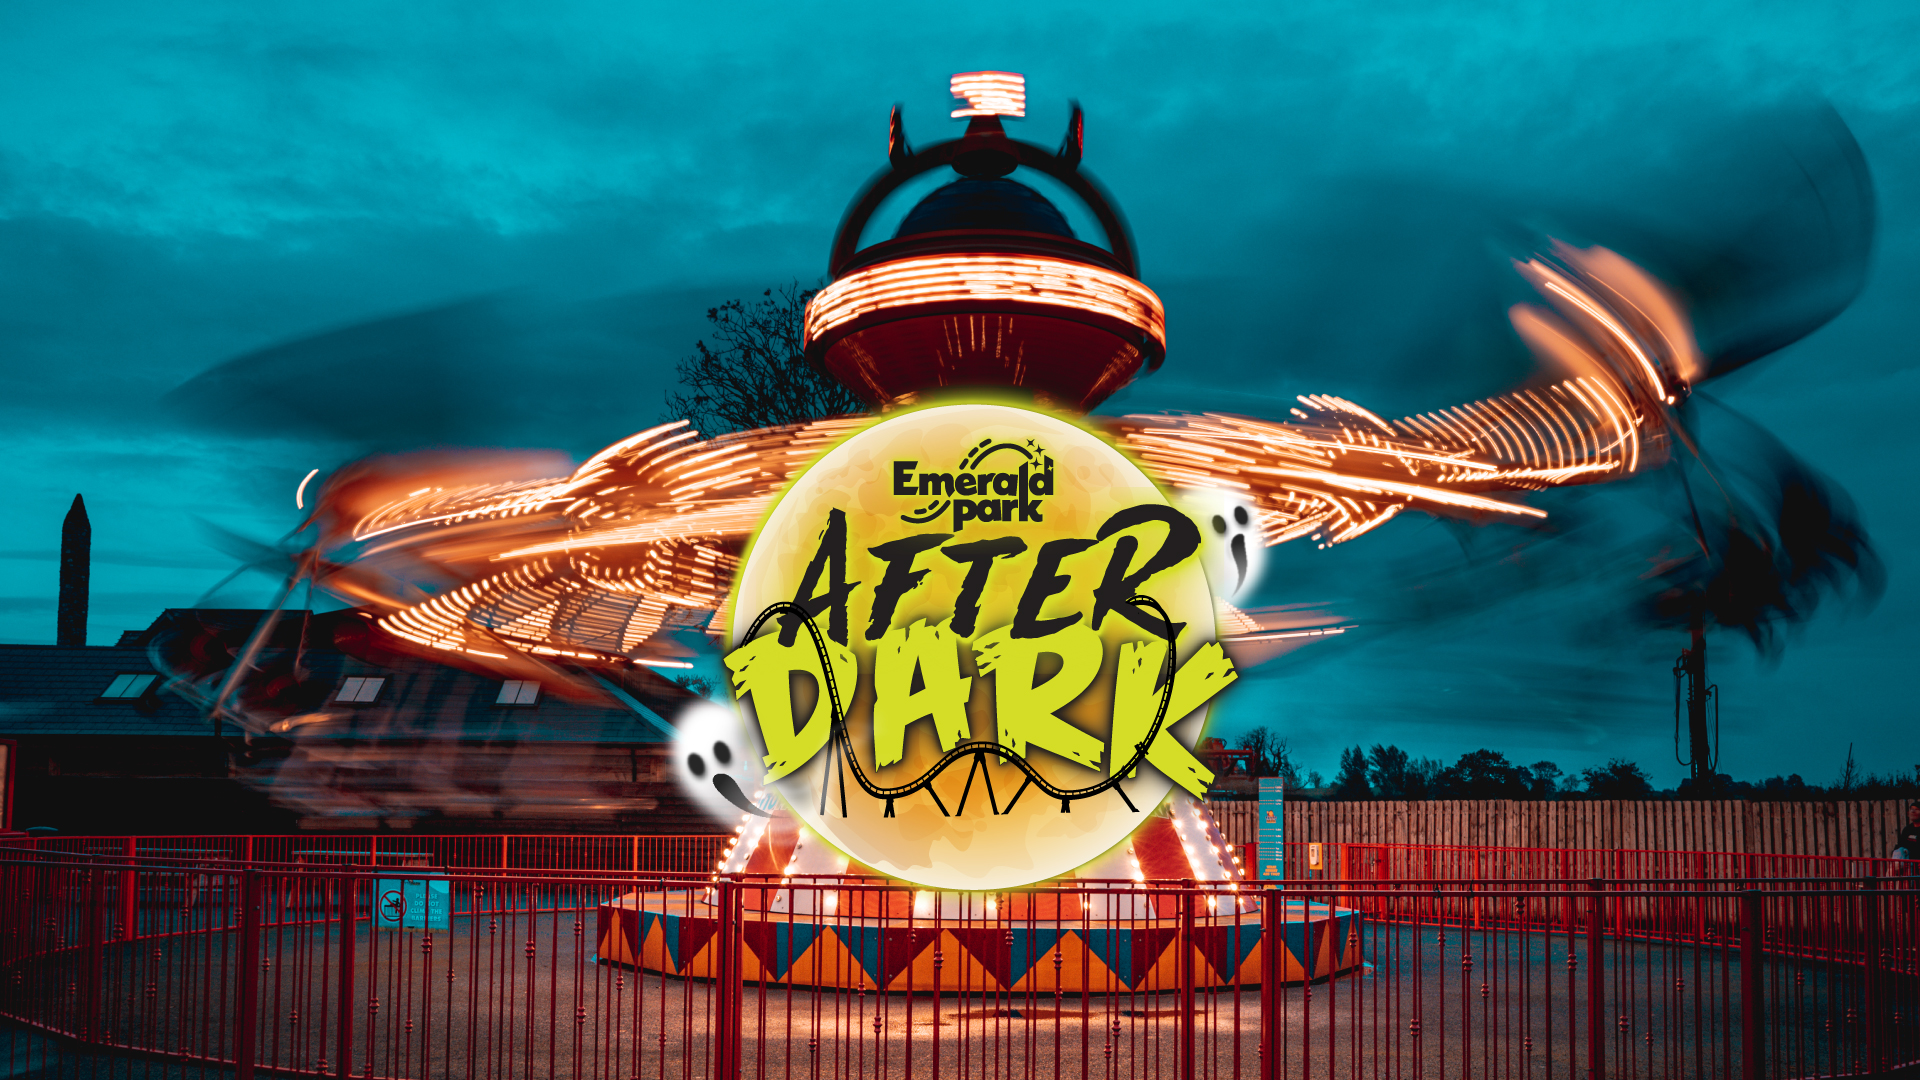 Windstar attraction at Emerald Park. The ride is in motion. It is at nighttime and the attraction is lit up. An After Dark logo overlays the image